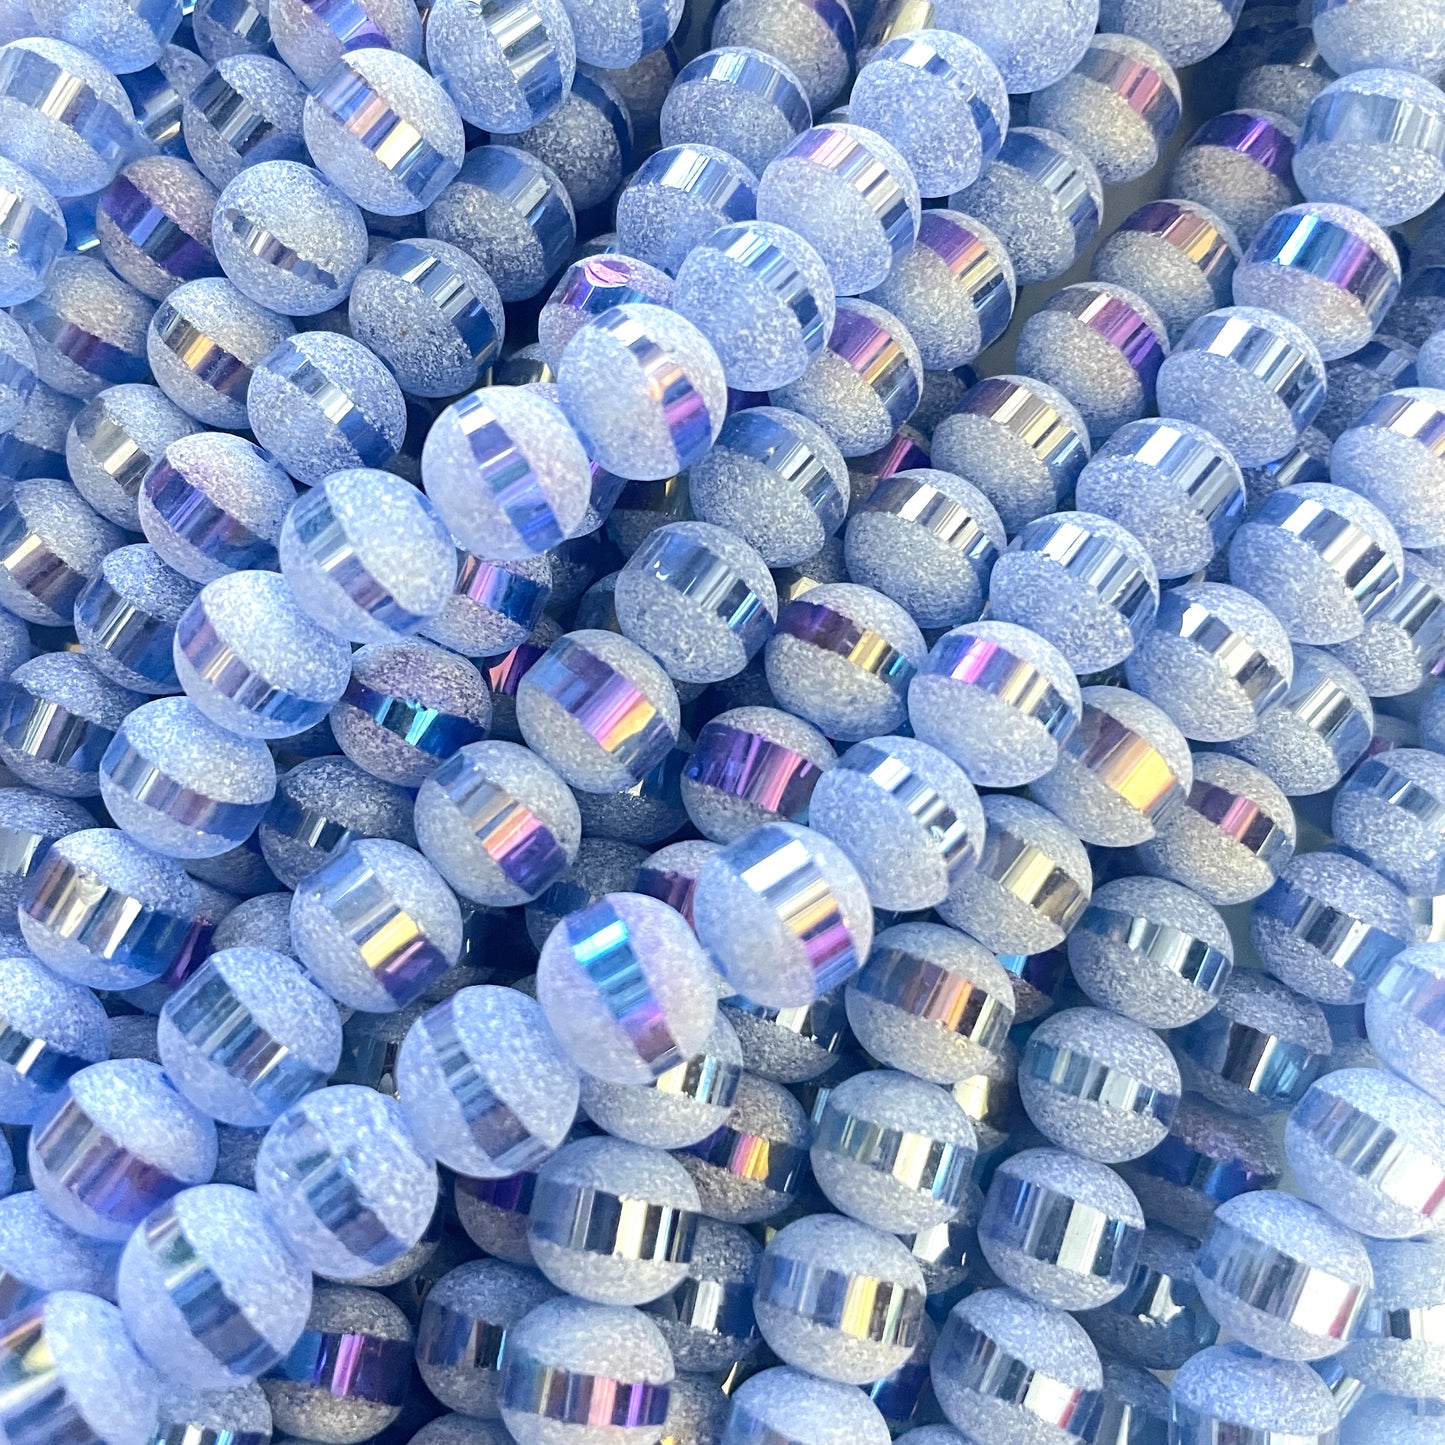 2 Strands/lot 10mm Electroplated Half Matte Round Glass Beads-Blue Glass Beads Round Glass Beads Charms Beads Beyond